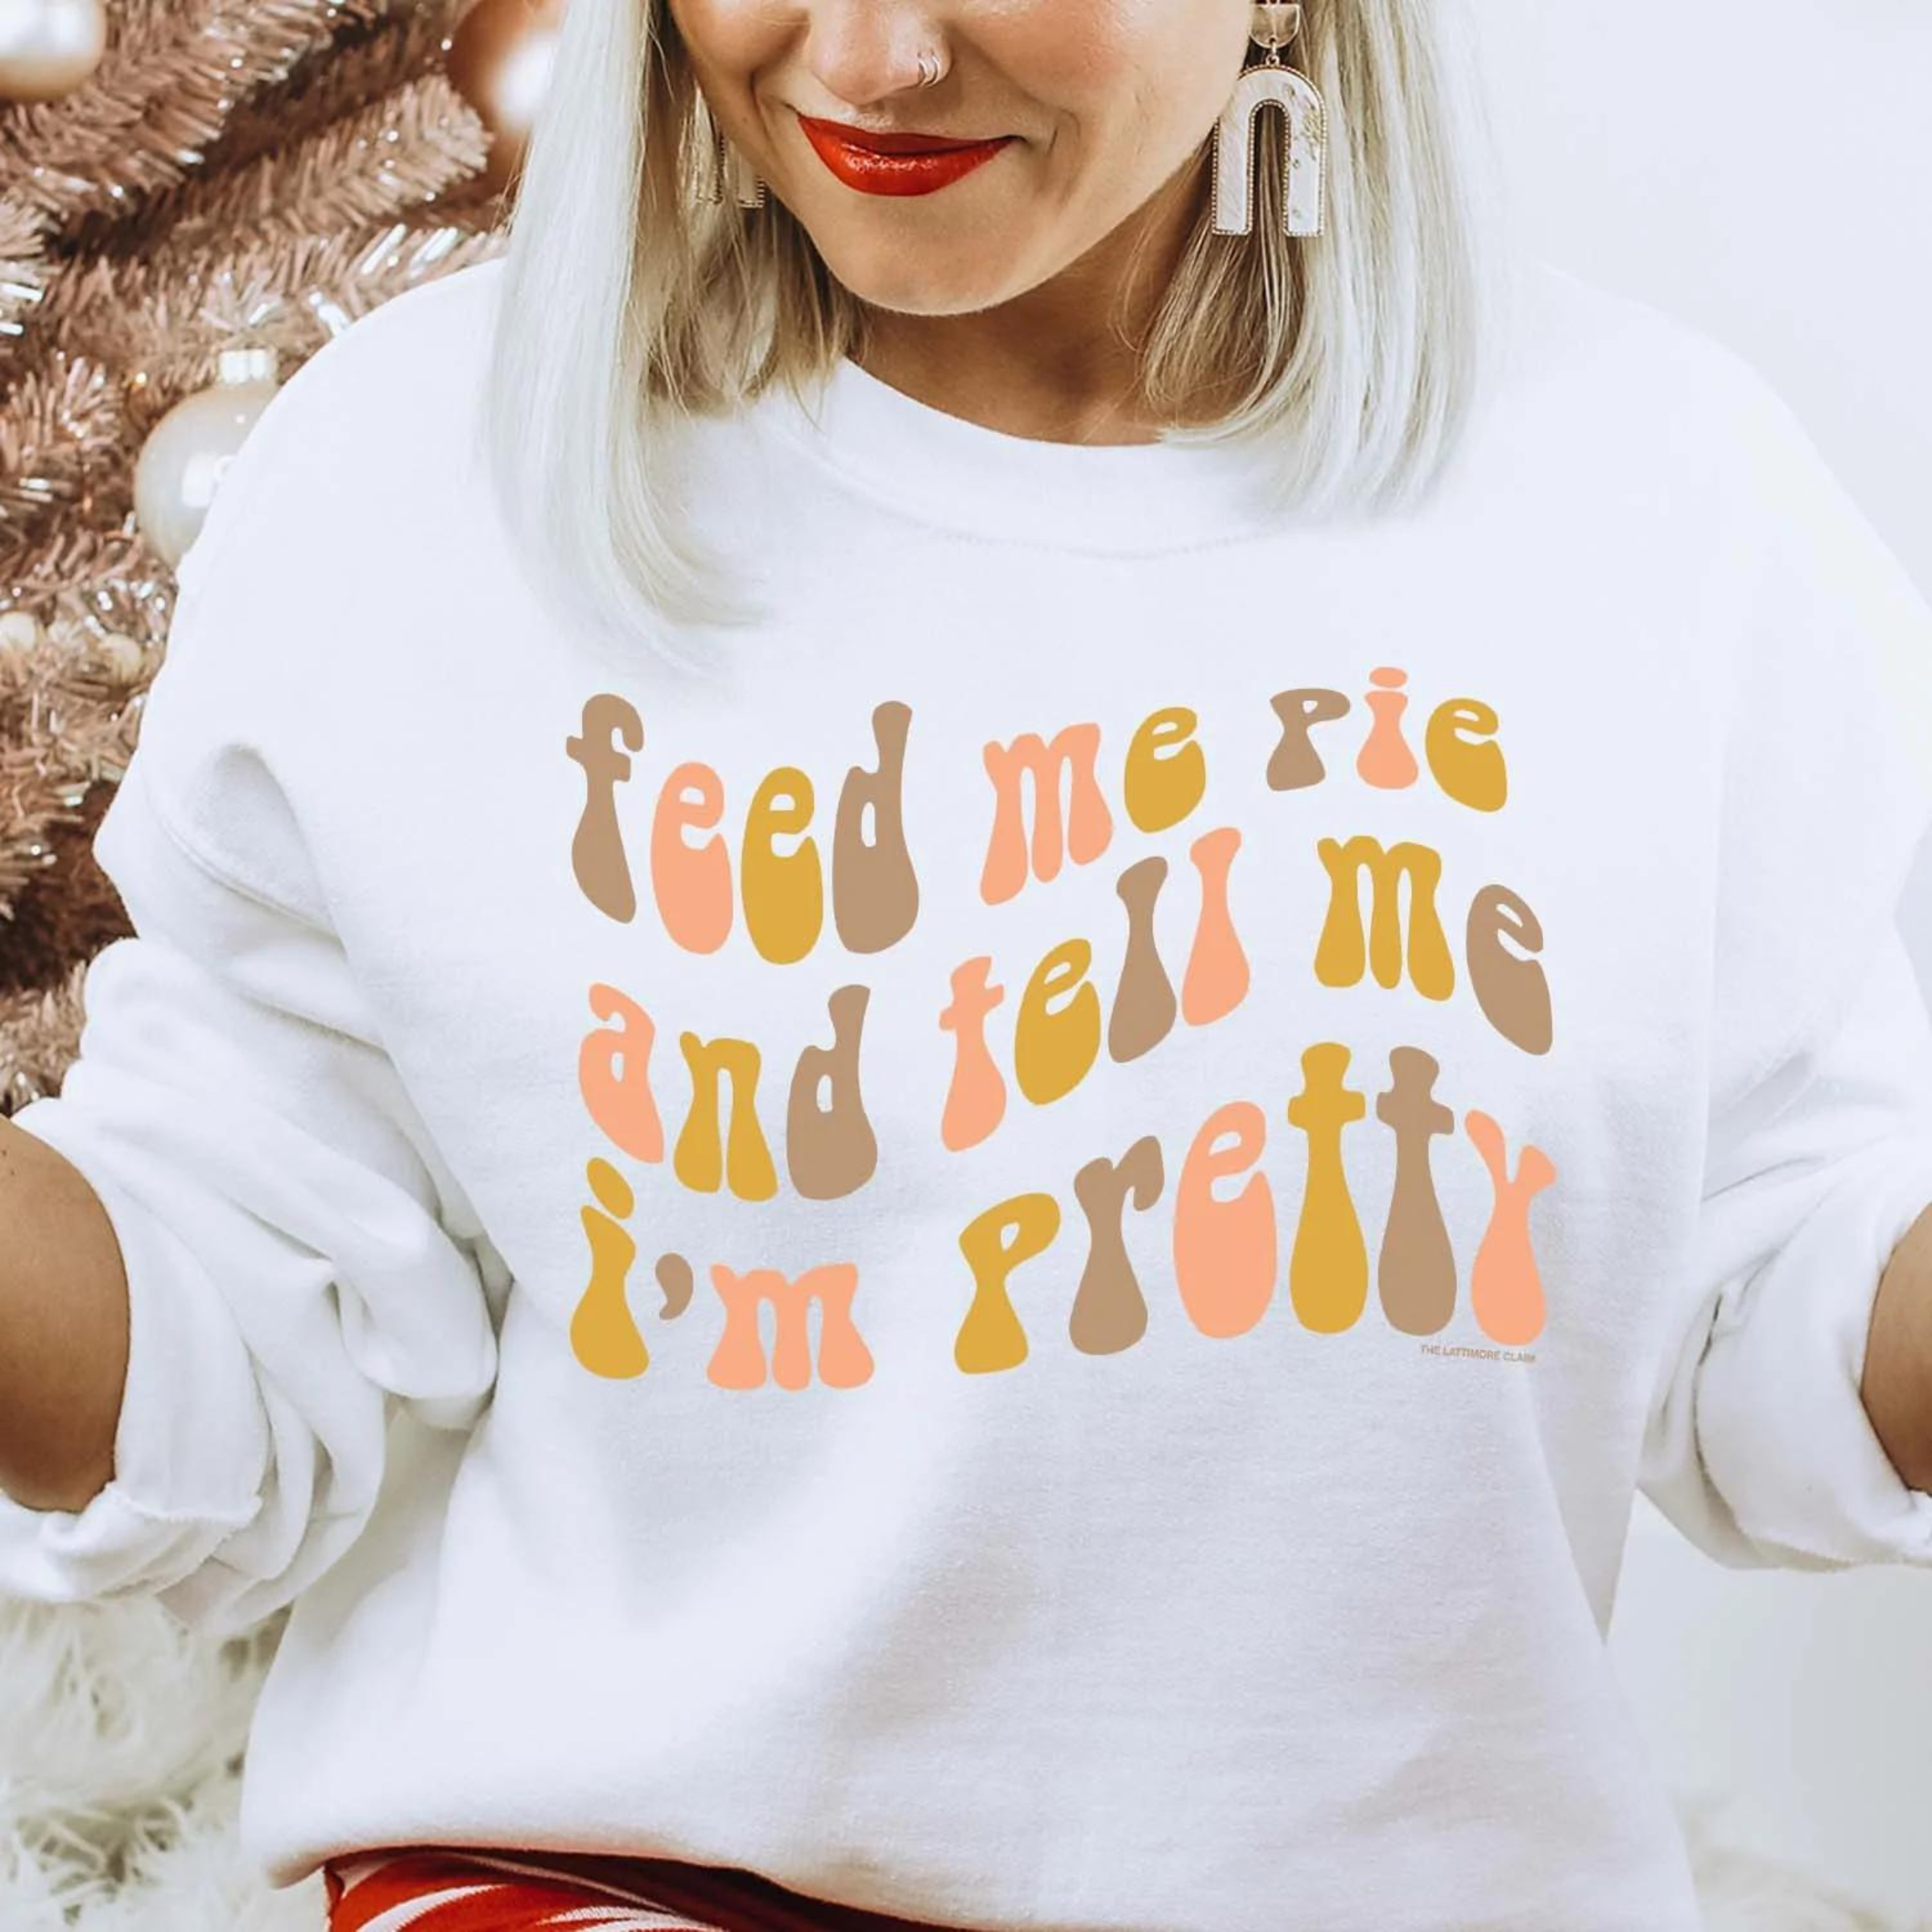 Model is wearing a white sweatshirt saying "feed me pie and tell me I'm pretty" with colors alternating in brown, pink, and mustard. Model has white dangle earrings. Background is white with a brown Christmas tree behind the model.